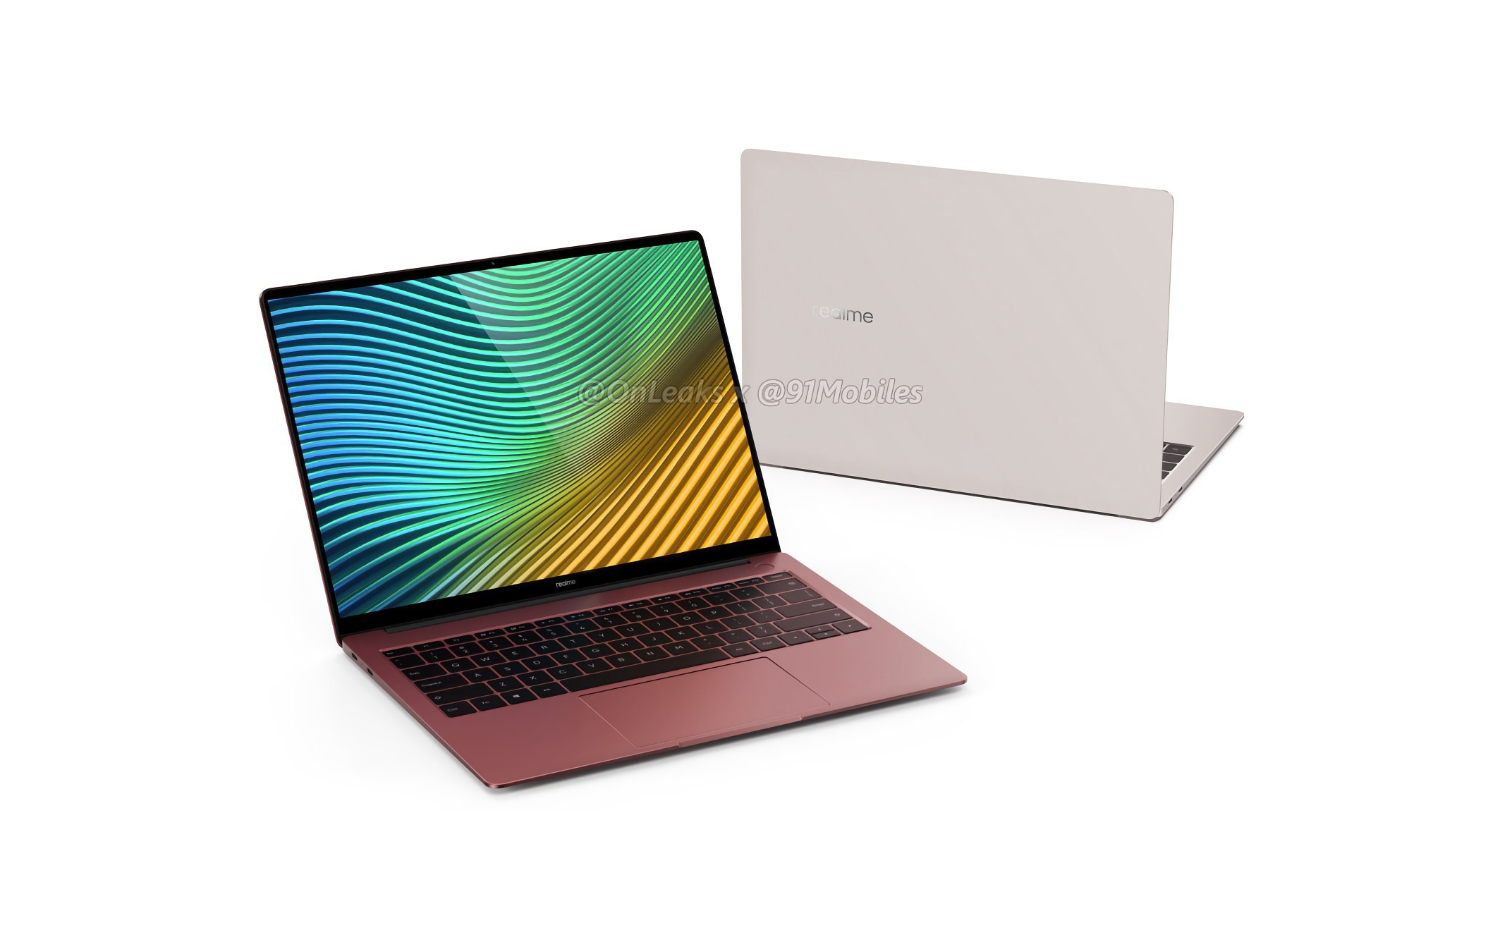 Realme reveals the specs of its first laptop: 14-inch screen, Intel Core i5-1135G7 chip, up to 16 GB of RAM and Windows 10 out of the box